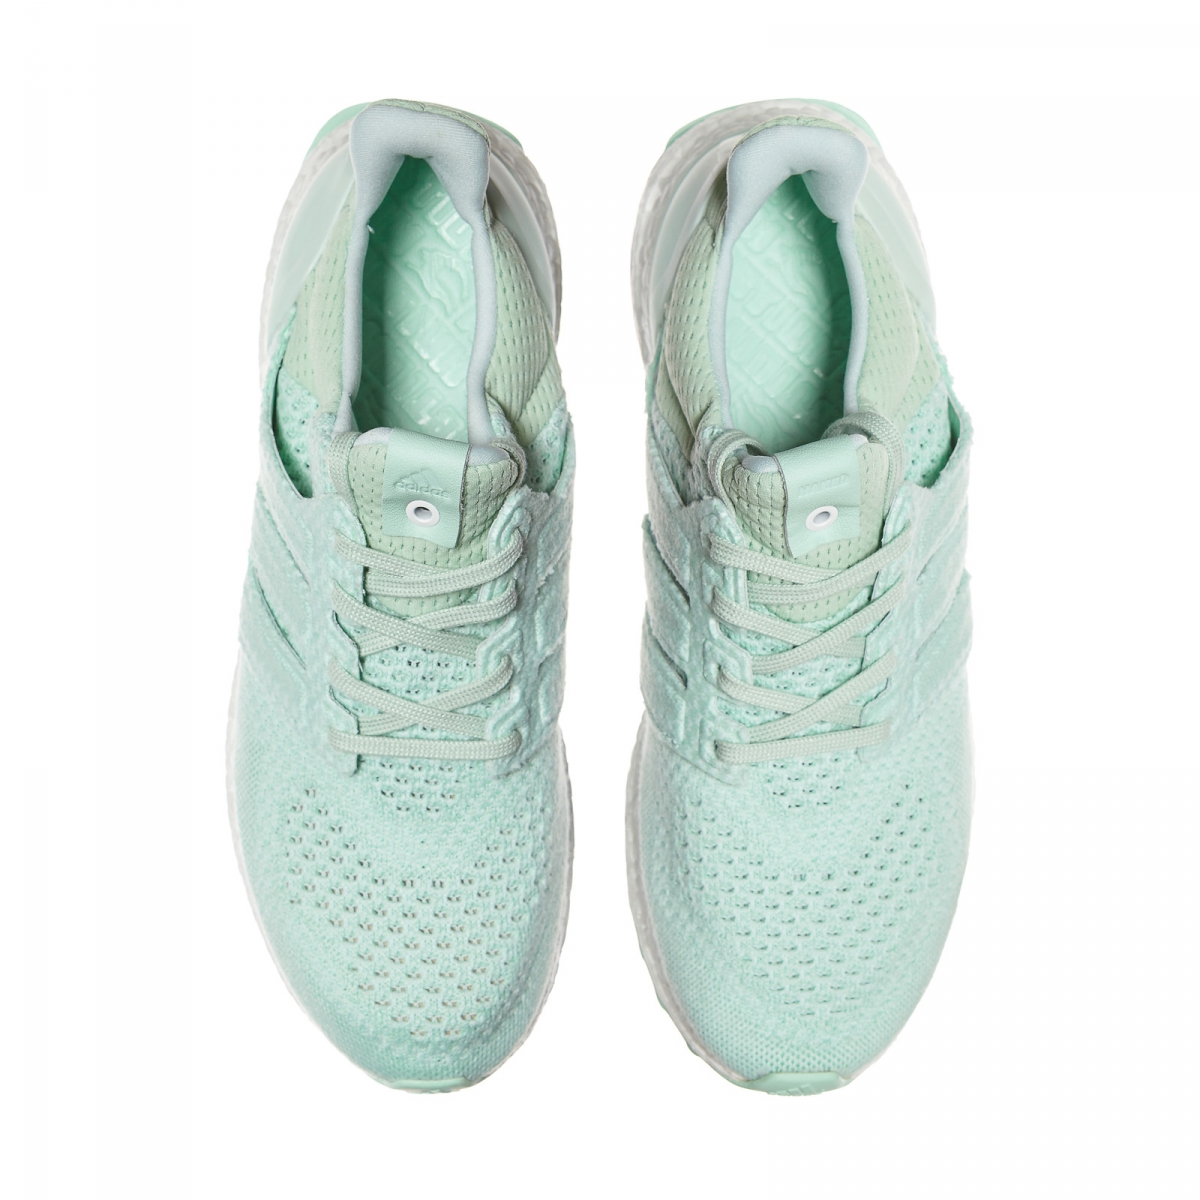 Adidas Consortium x Naked
Ultra Boost Primeknit
« Waves Pack »
Mint Green / White